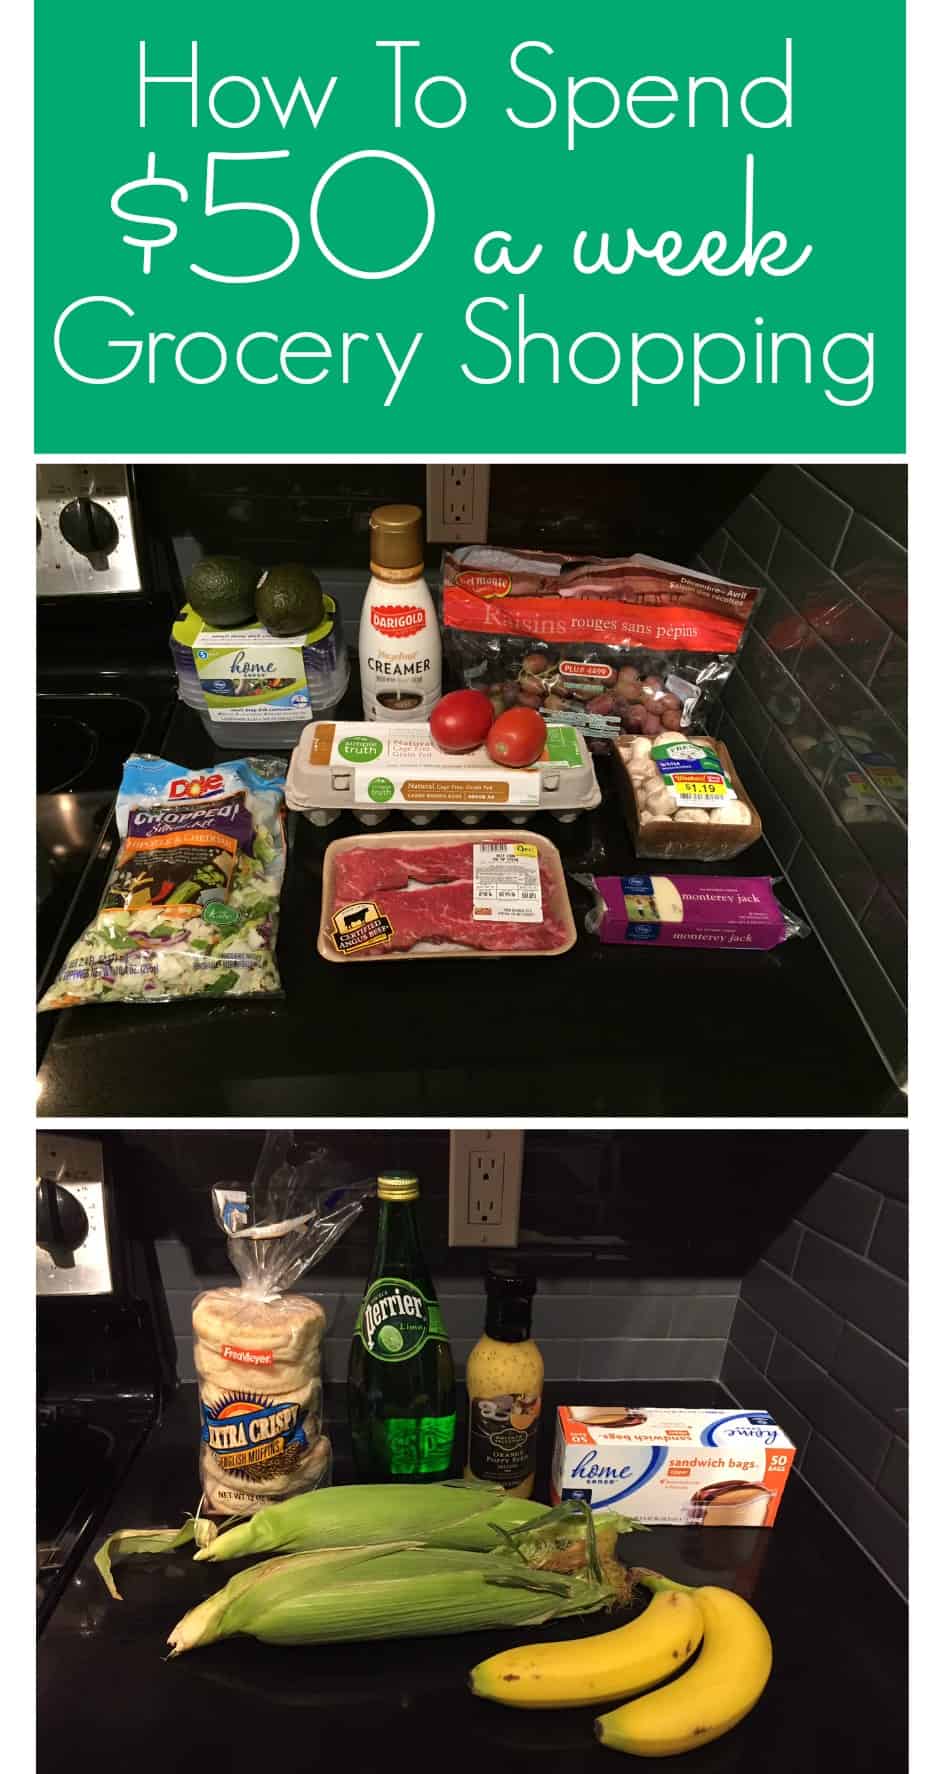 How to spend $50 a week grocery shopping